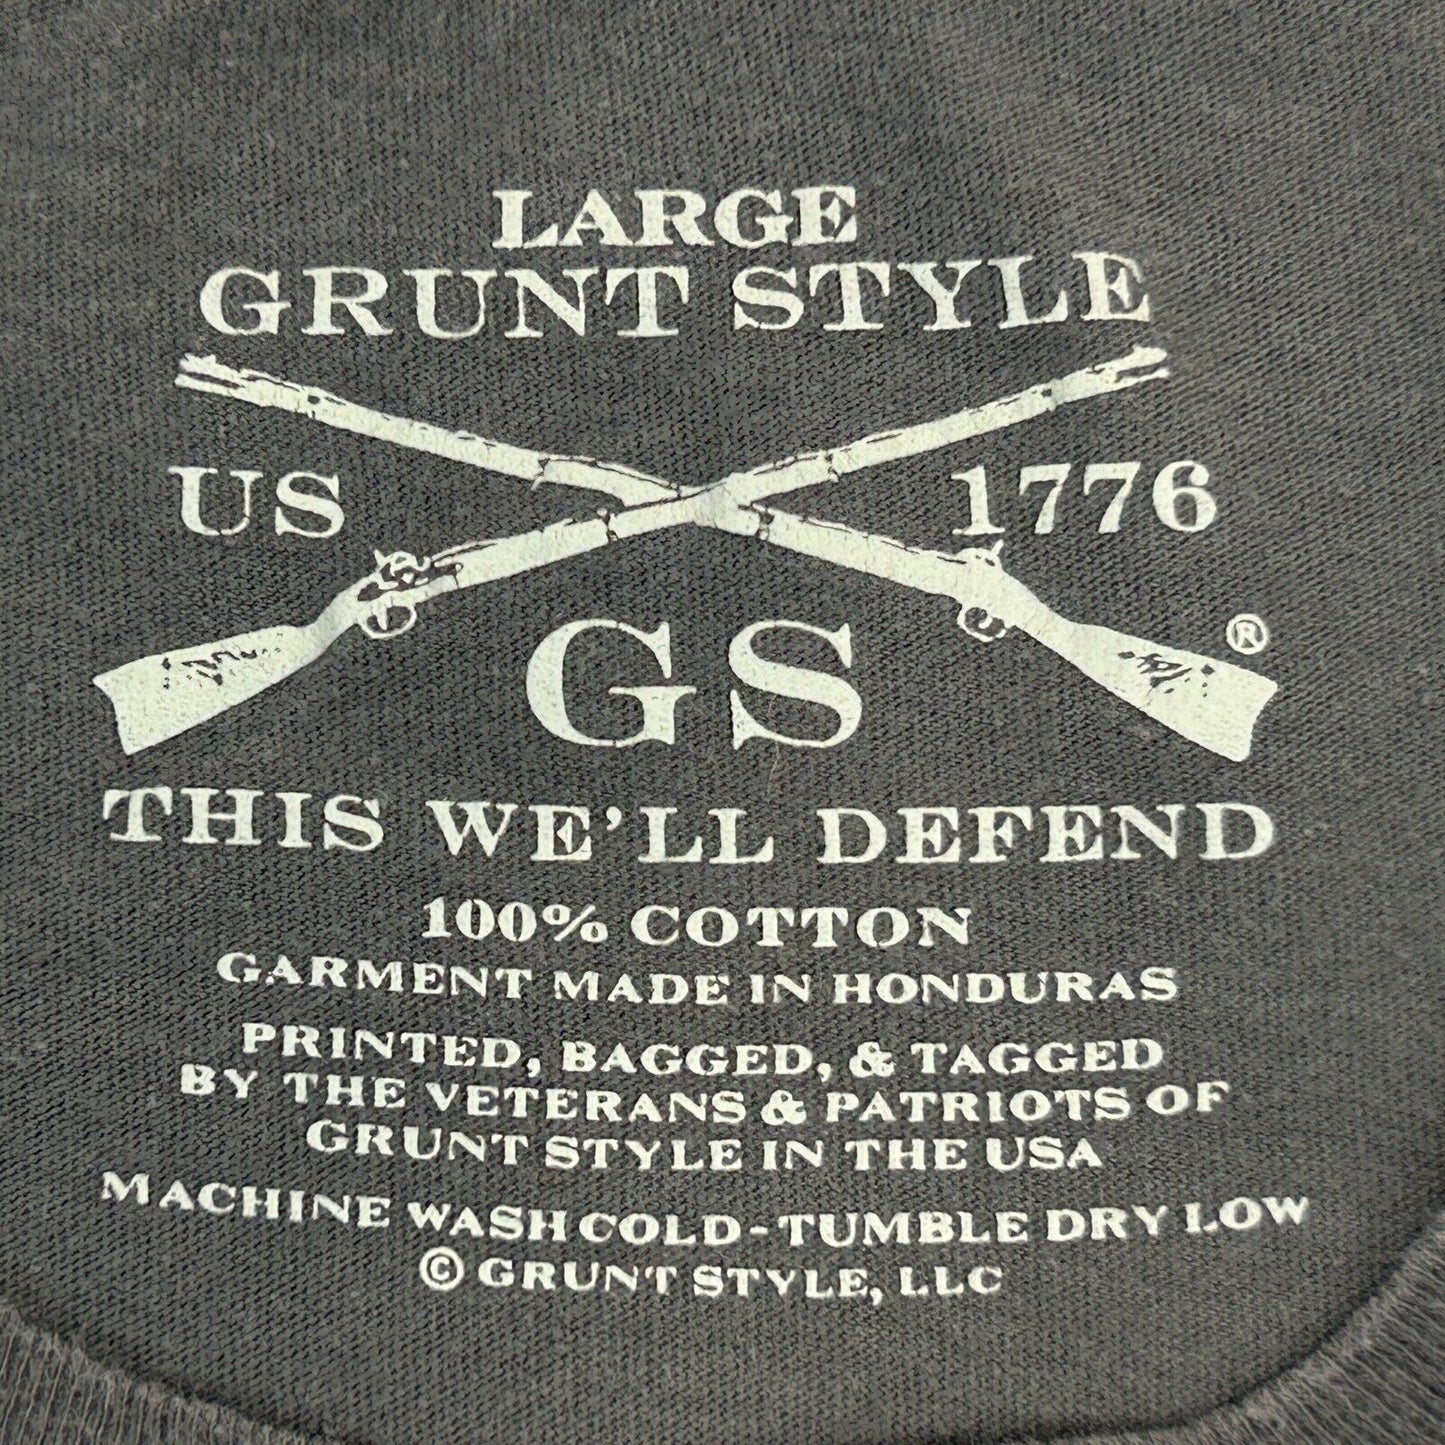 Club Grunt Style Dead Presidents Military T Shirt Large War Patriotic Mens Gray